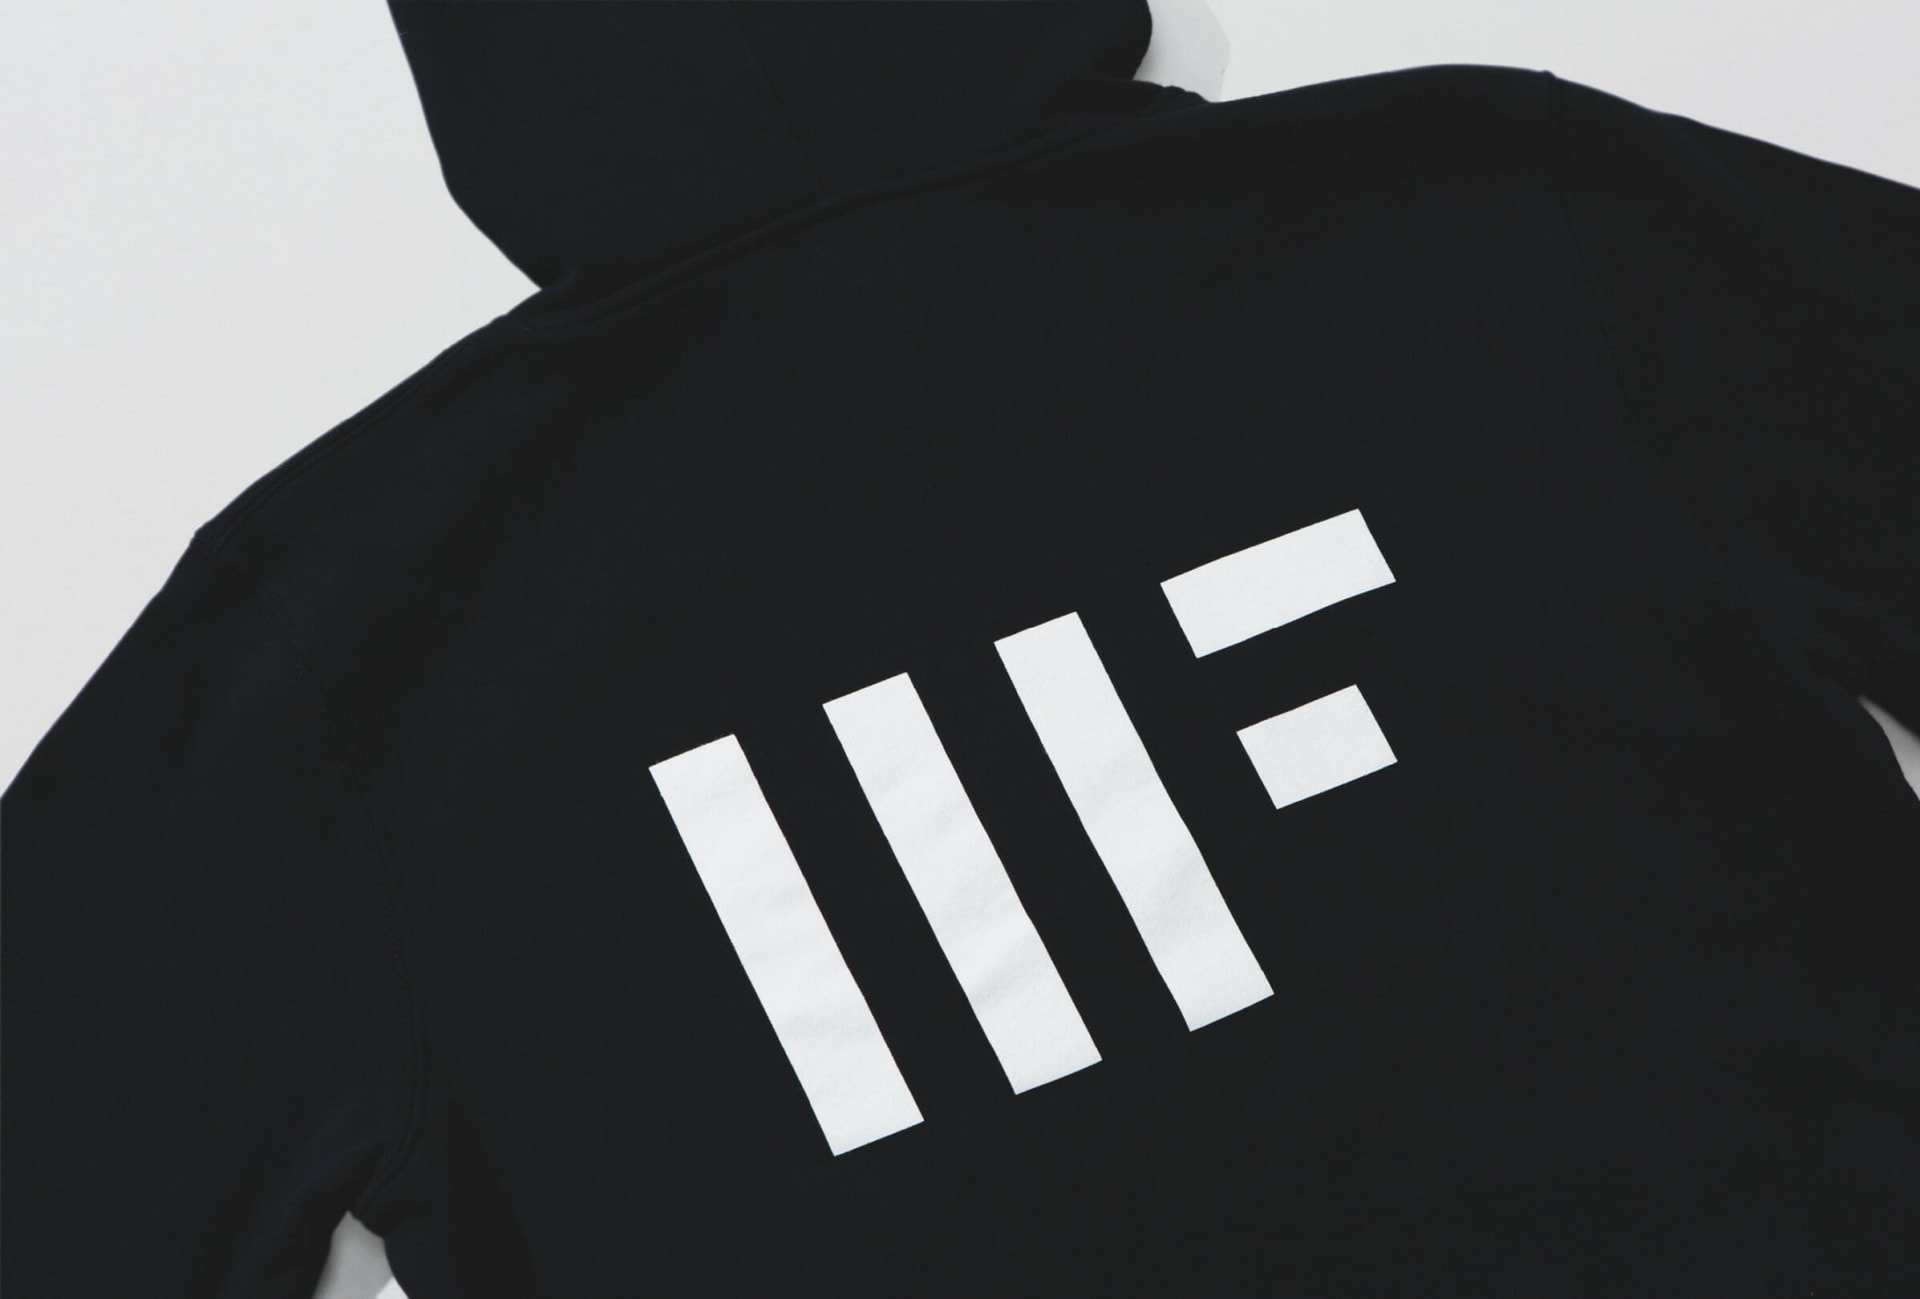 Branded clothing for new identity for Madeform.